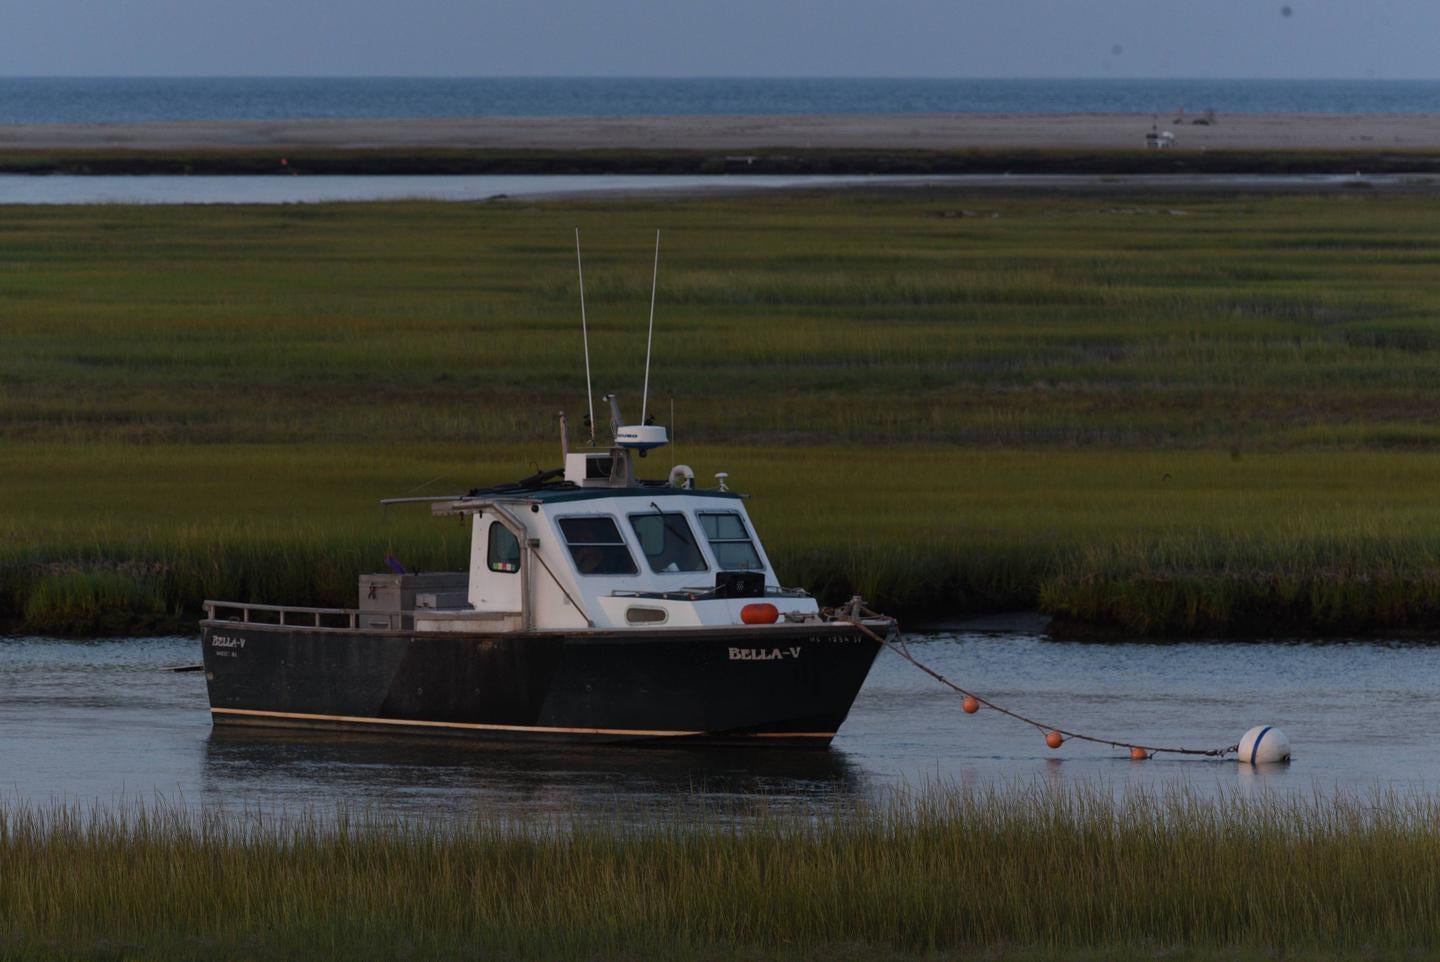 Explore the harbors and marshes of Wellfleet



Credit: NPS